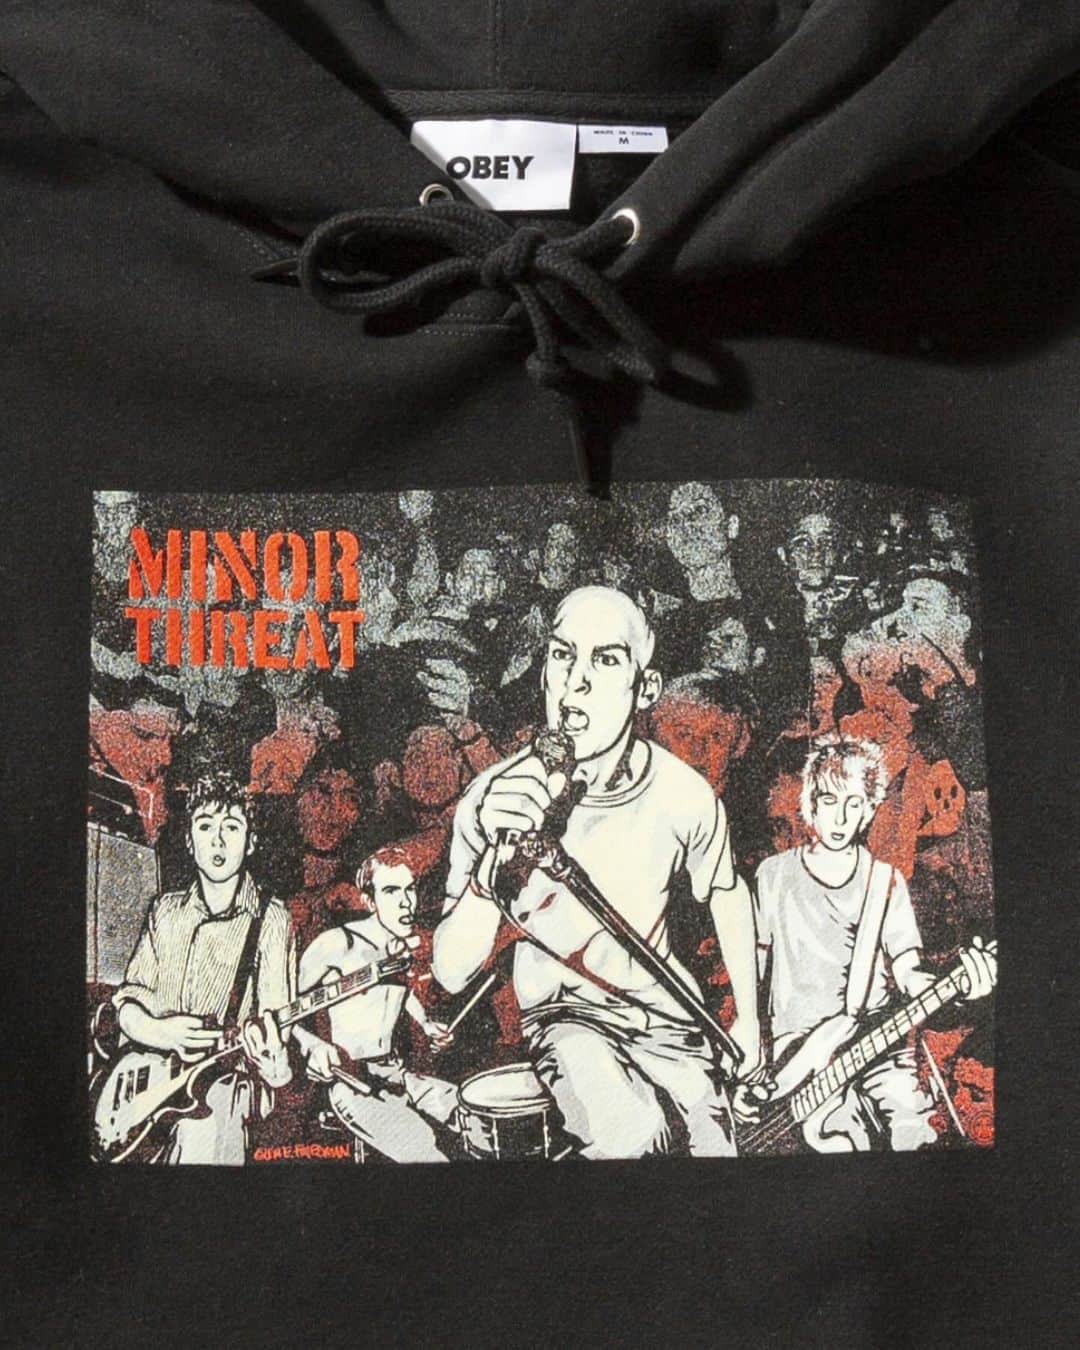 Shepard Faireyのインスタグラム：「In support of the release of @glenefriedman’s new book Just A Minor Threat, @obeyclothing released a limited run of Minor Threat shirts and a small number of signed copies of the book.⁠ ⁠ I first heard Minor Threat in 1985 when I had been skateboarding and listening to punk and hardcore for a year. I was quickly becoming more confident, outspoken, and energized by D.I.Y. culture, and I was voraciously hungry for things that fueled my emotional and intellectual evolution. Minor Threat was rocket fuel for my journey. Not only is their music a ferocious explosion of energy, but their playing is tight, and Ian Mackaye’s lyrics are intelligent and provocative. On top of that, Minor Threat created their own label, @dischordrecords, to put out their music as well as records by other D.C. bands. Minor Threat and Dischord are profound influences on me, so I was very excited to collaborate with Glen on a Minor Threat print to celebrate the release of his new book Just A Minor Threat. Glen has the most intimate and powerful photos of Minor Threat, so it was possible to craft an illustration with strong images of all the band members. I’m also incredibly grateful to have the blessing of the members of Minor Threat. –Shepard」